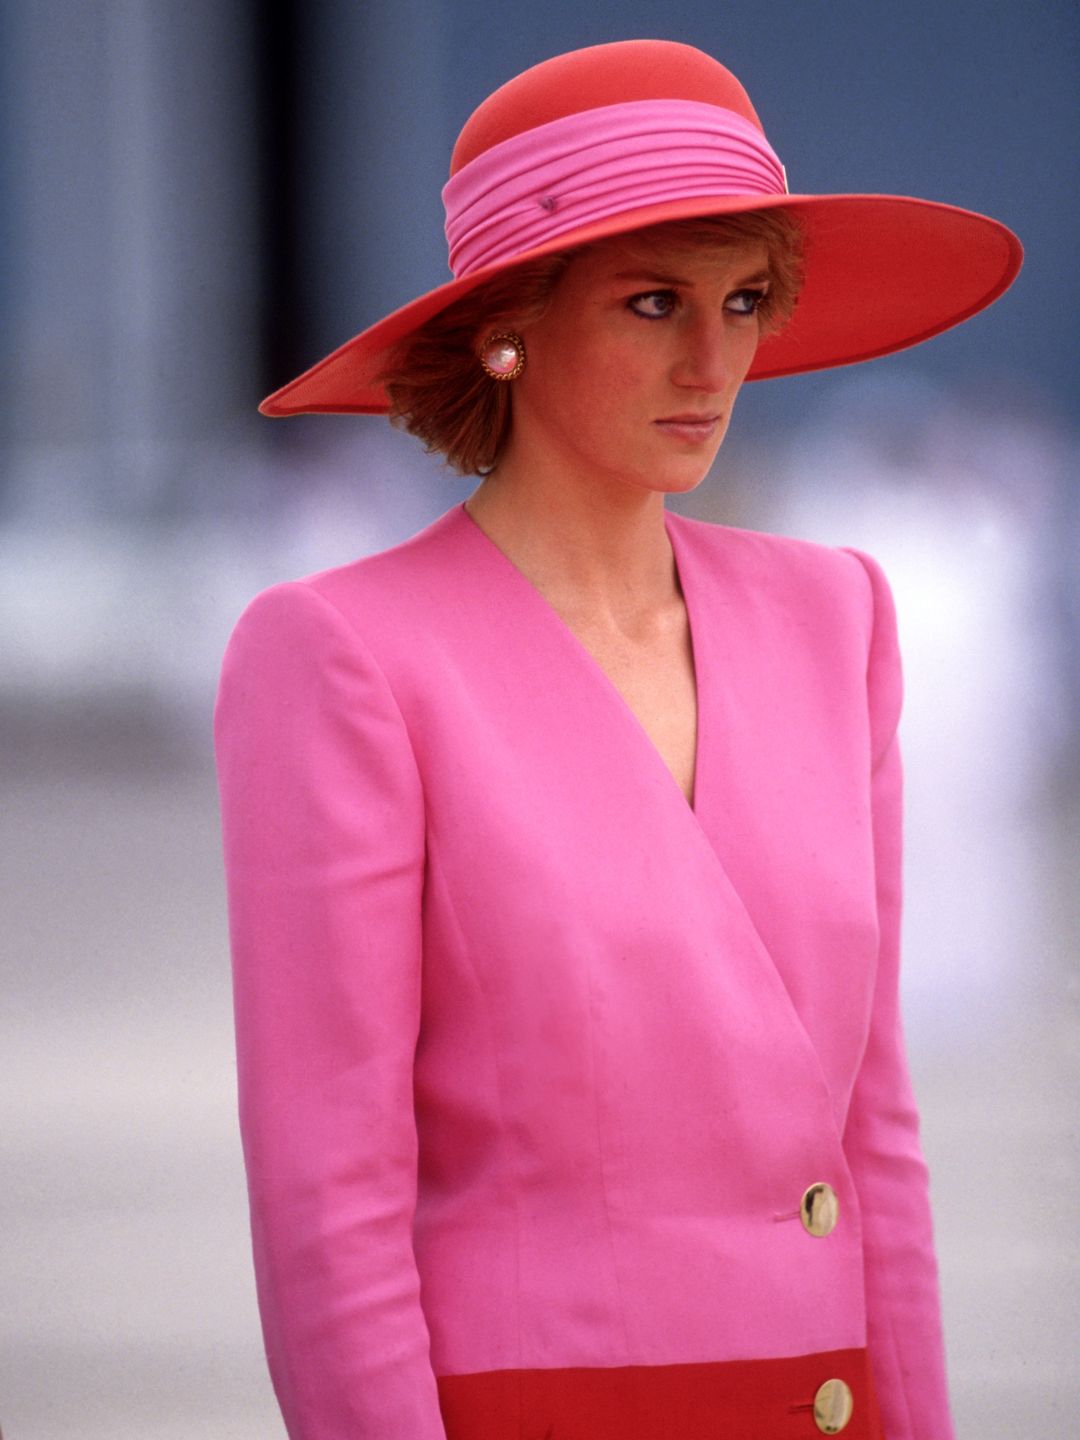 Princess Diana was way ahead of her time